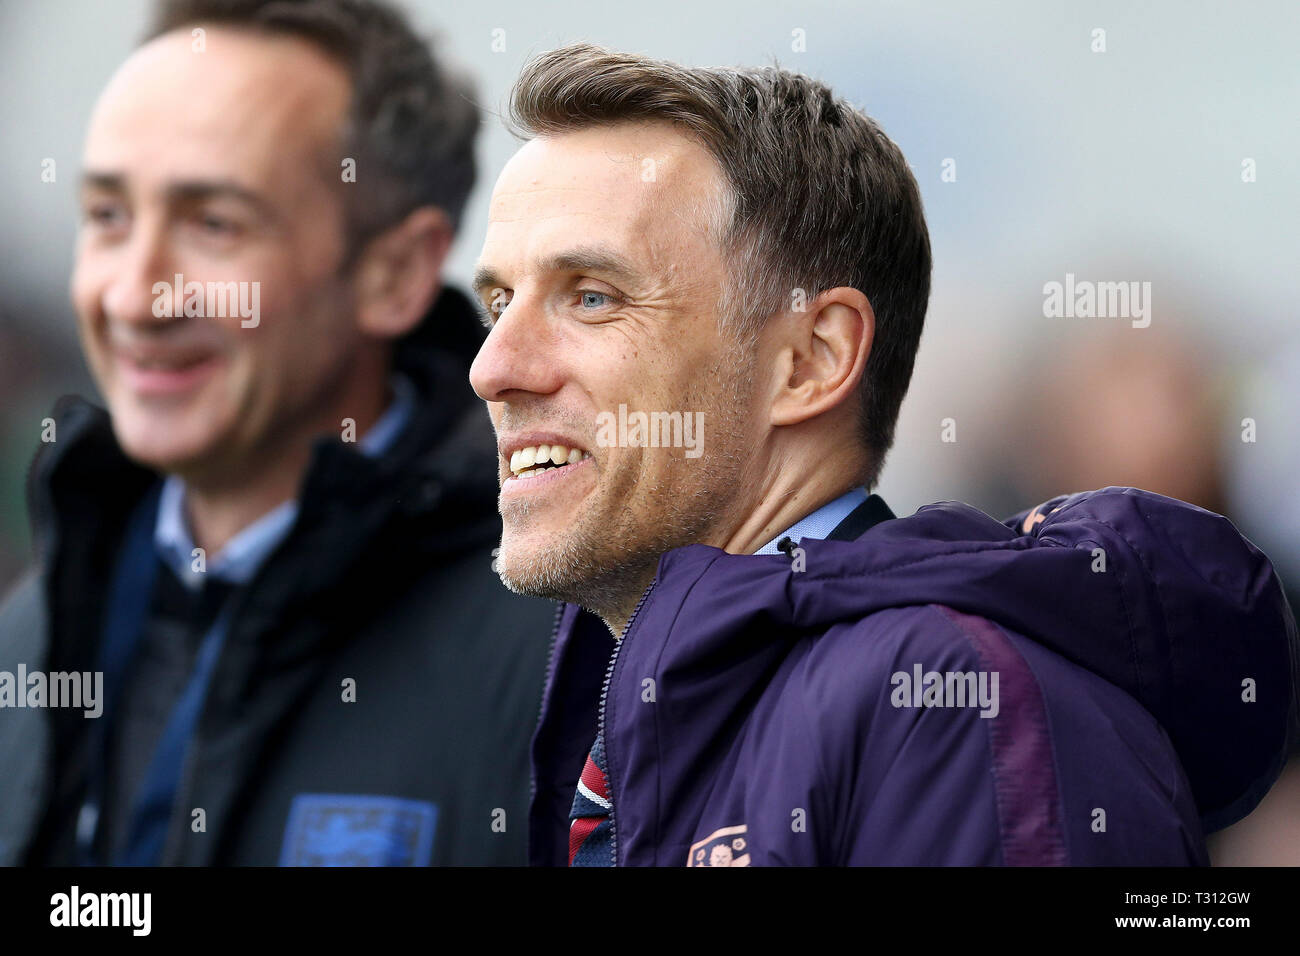 Manchester, UK. 05th Apr, 2019. England Manager Phil Neville looks on. England Women v Canada Women,  Women's international friendly football match at the Manchester City academy stadium in Manchester, Lancs on Friday 5th April 2019. EDITORIAL USE ONLY. pic by Chris Stading/ Andrew Orchard sports photography /Alamy Live News Stock Photo